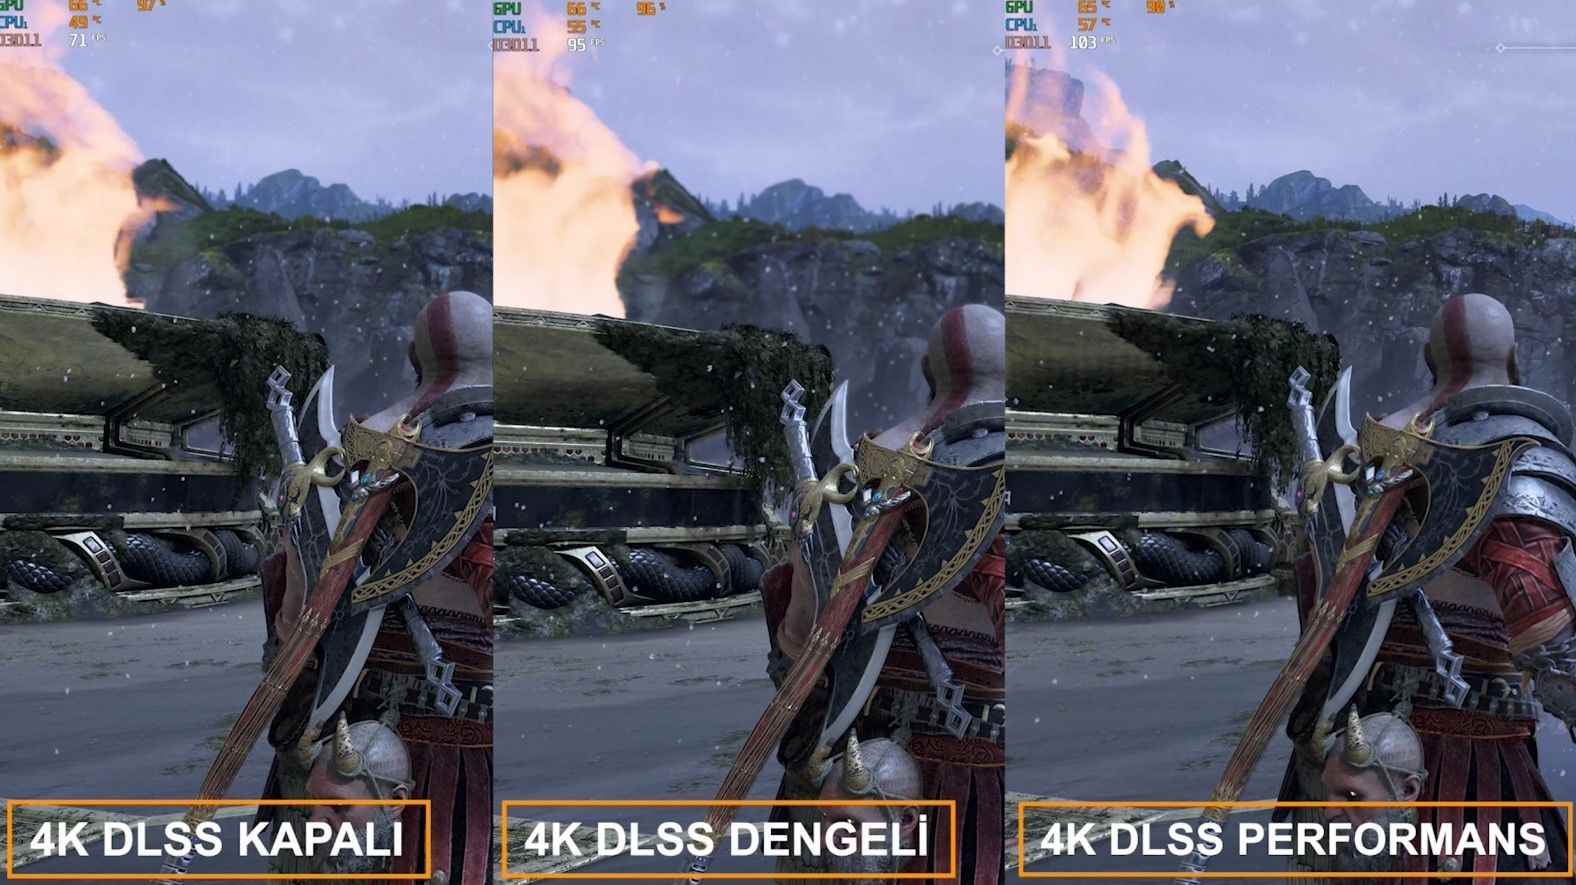 How much difference does NVidia DLSS make in games?